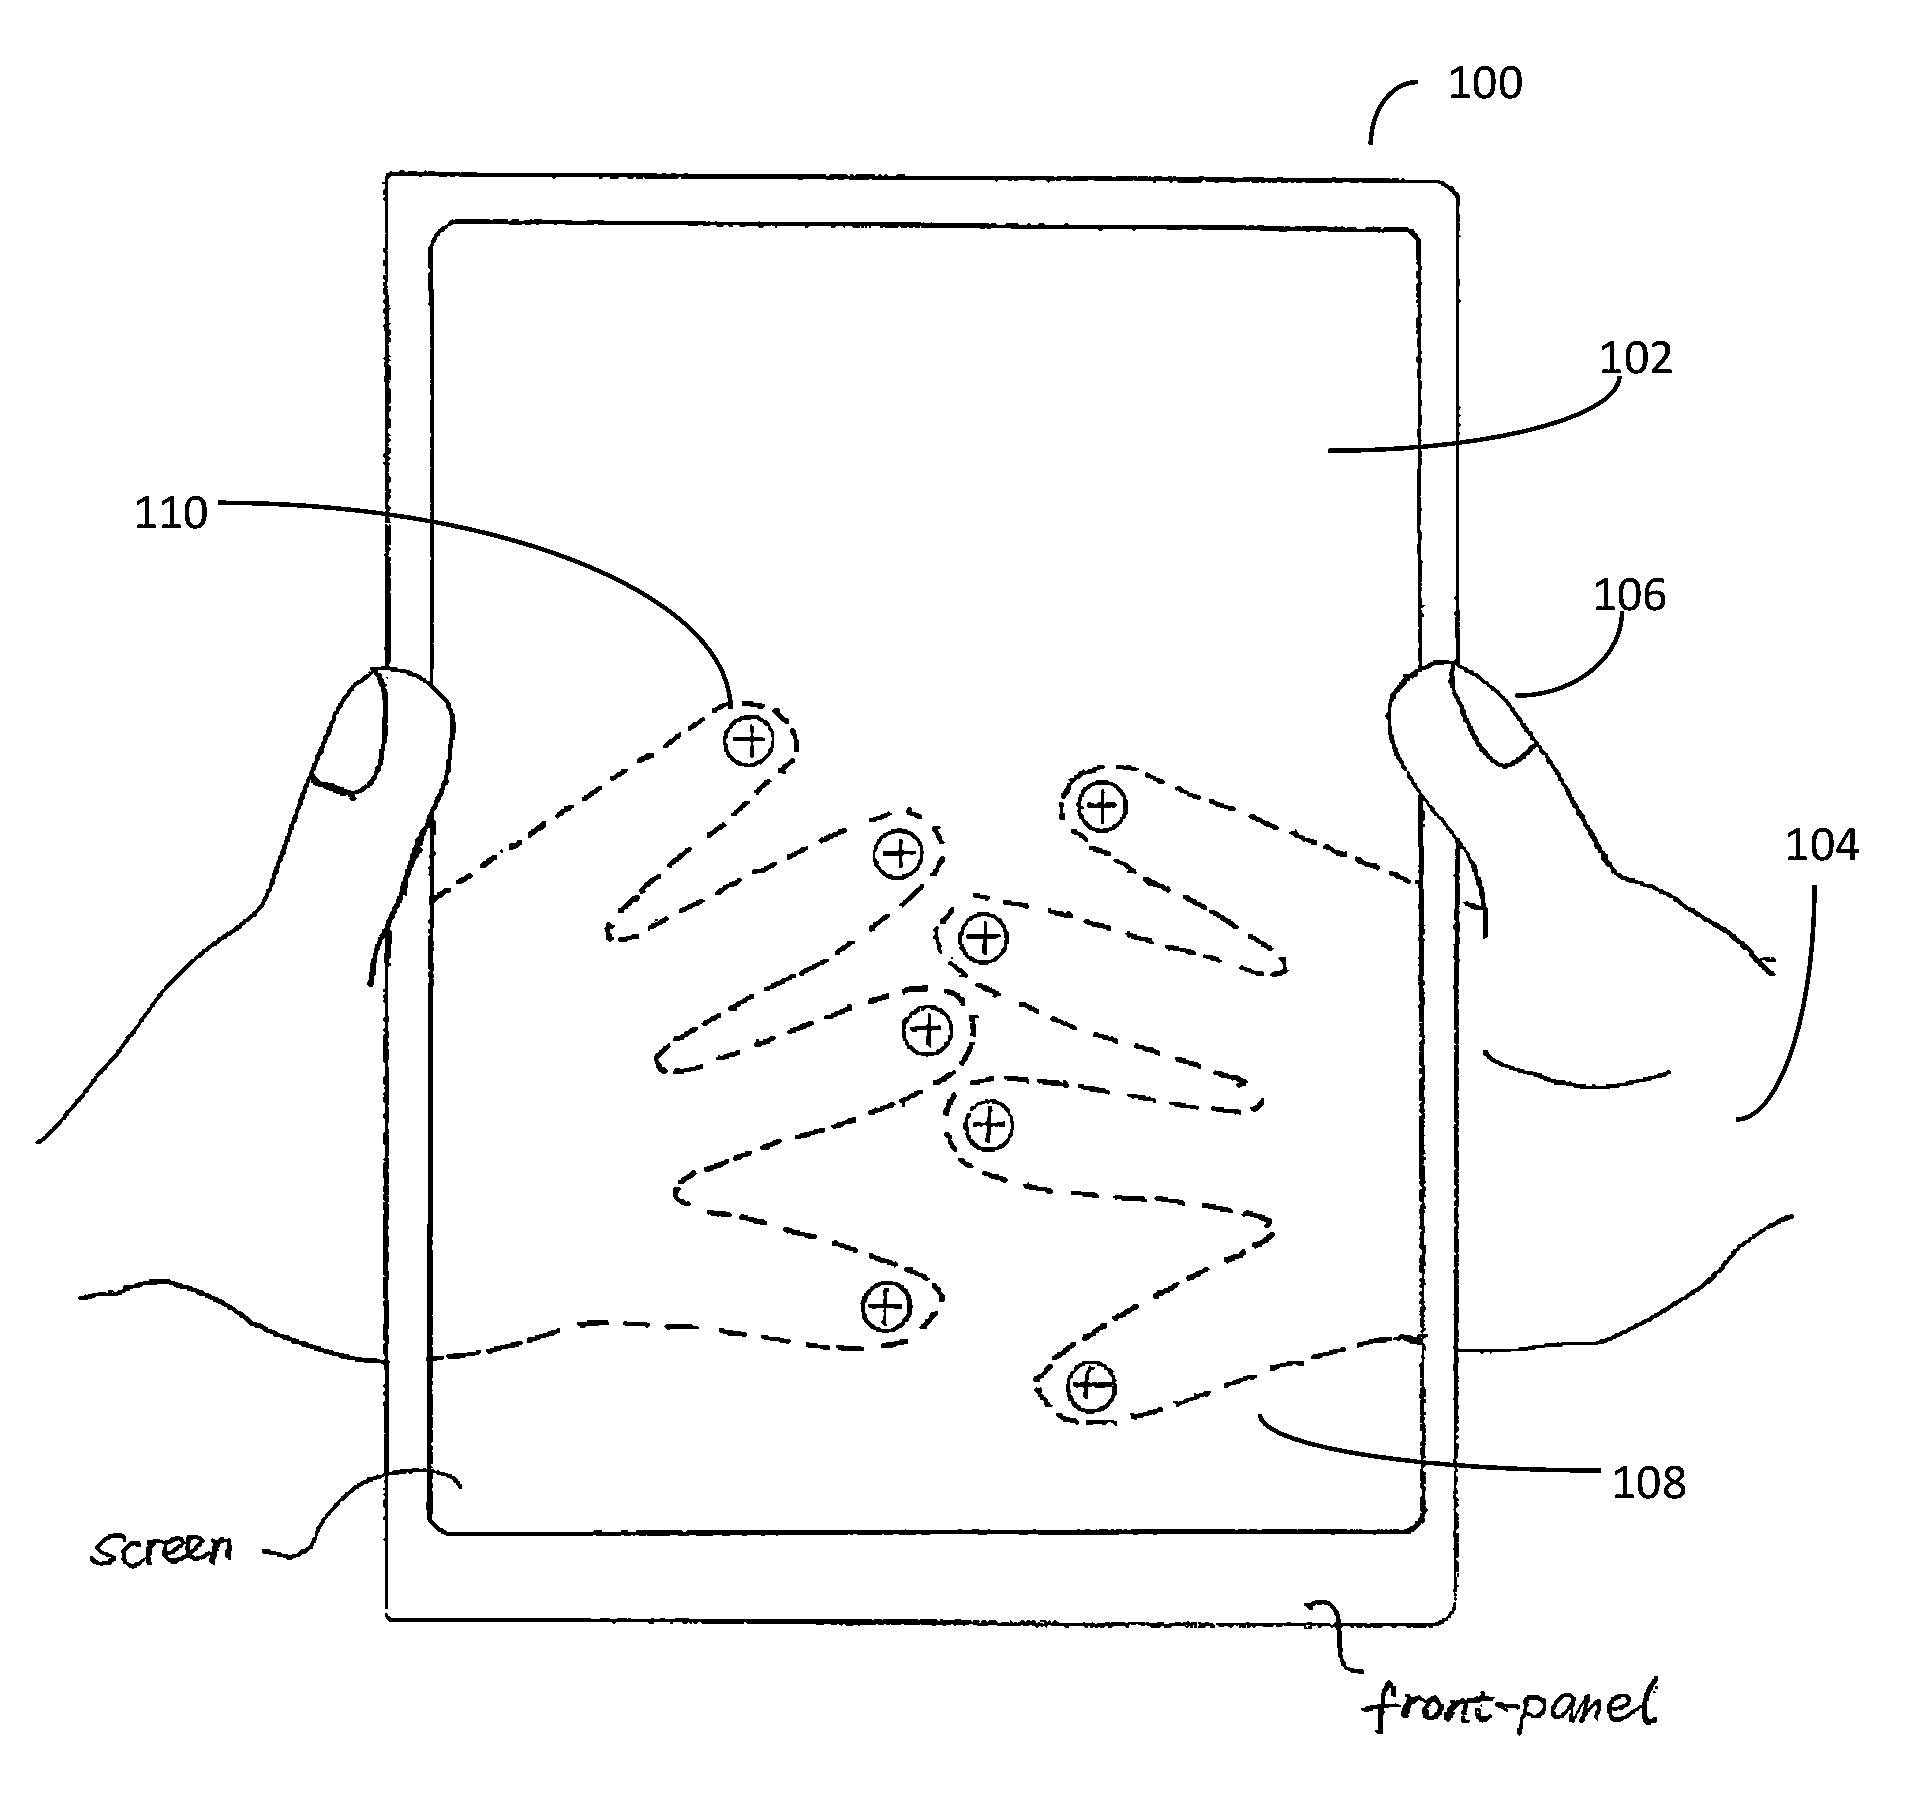 Method for user input from alternative touchpads of a handheld computerized device